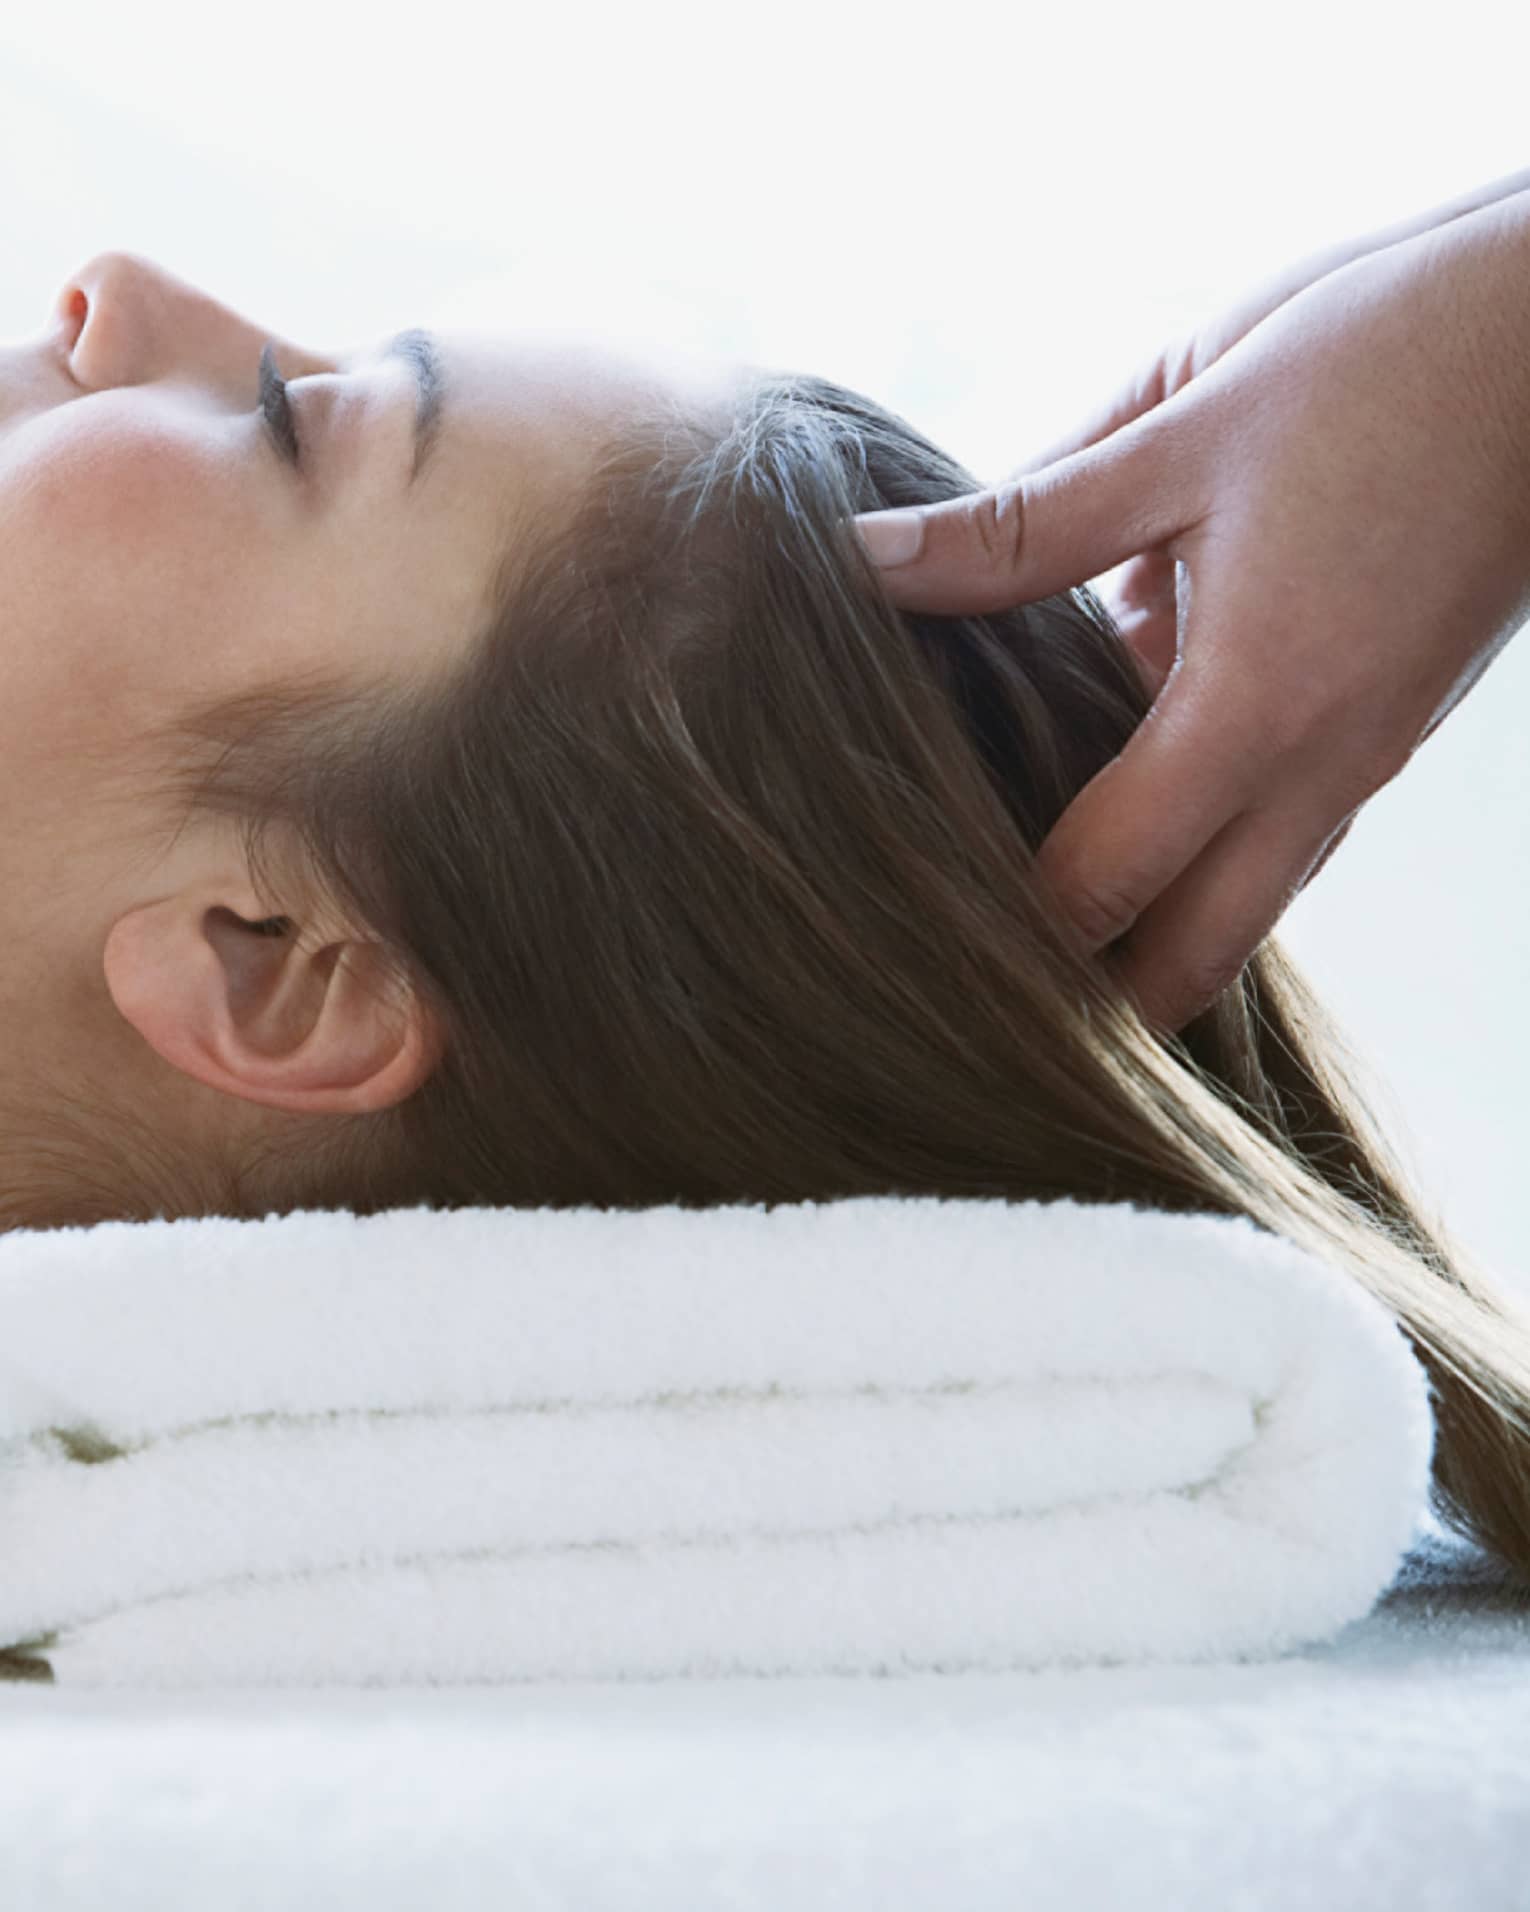 Woman lays on back with head on folded white towel, closes eyes as hands massage her scalp